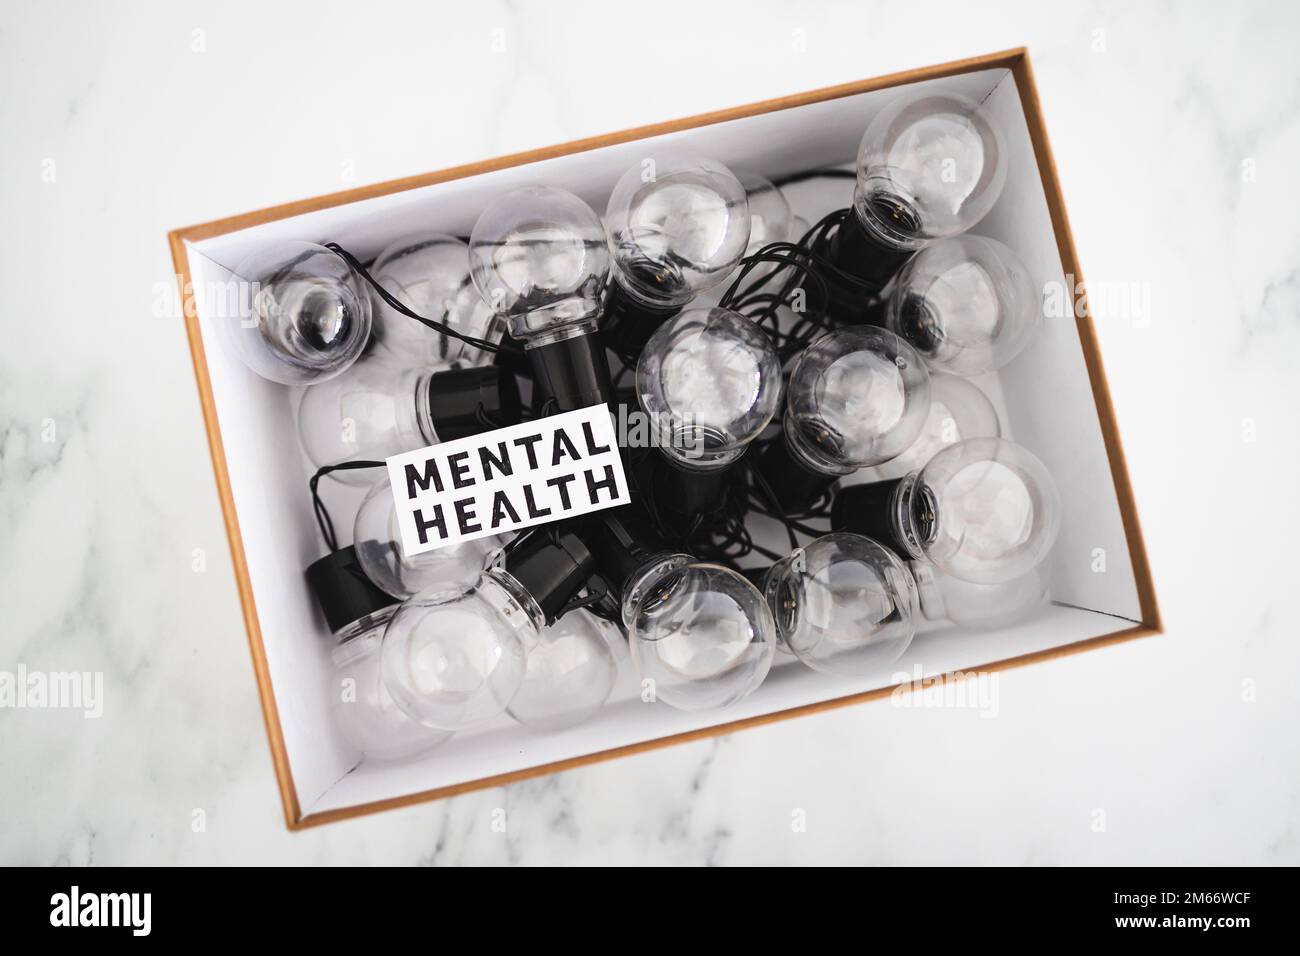 mental health text in box over group of light bulbs, psychology concept Stock Photo